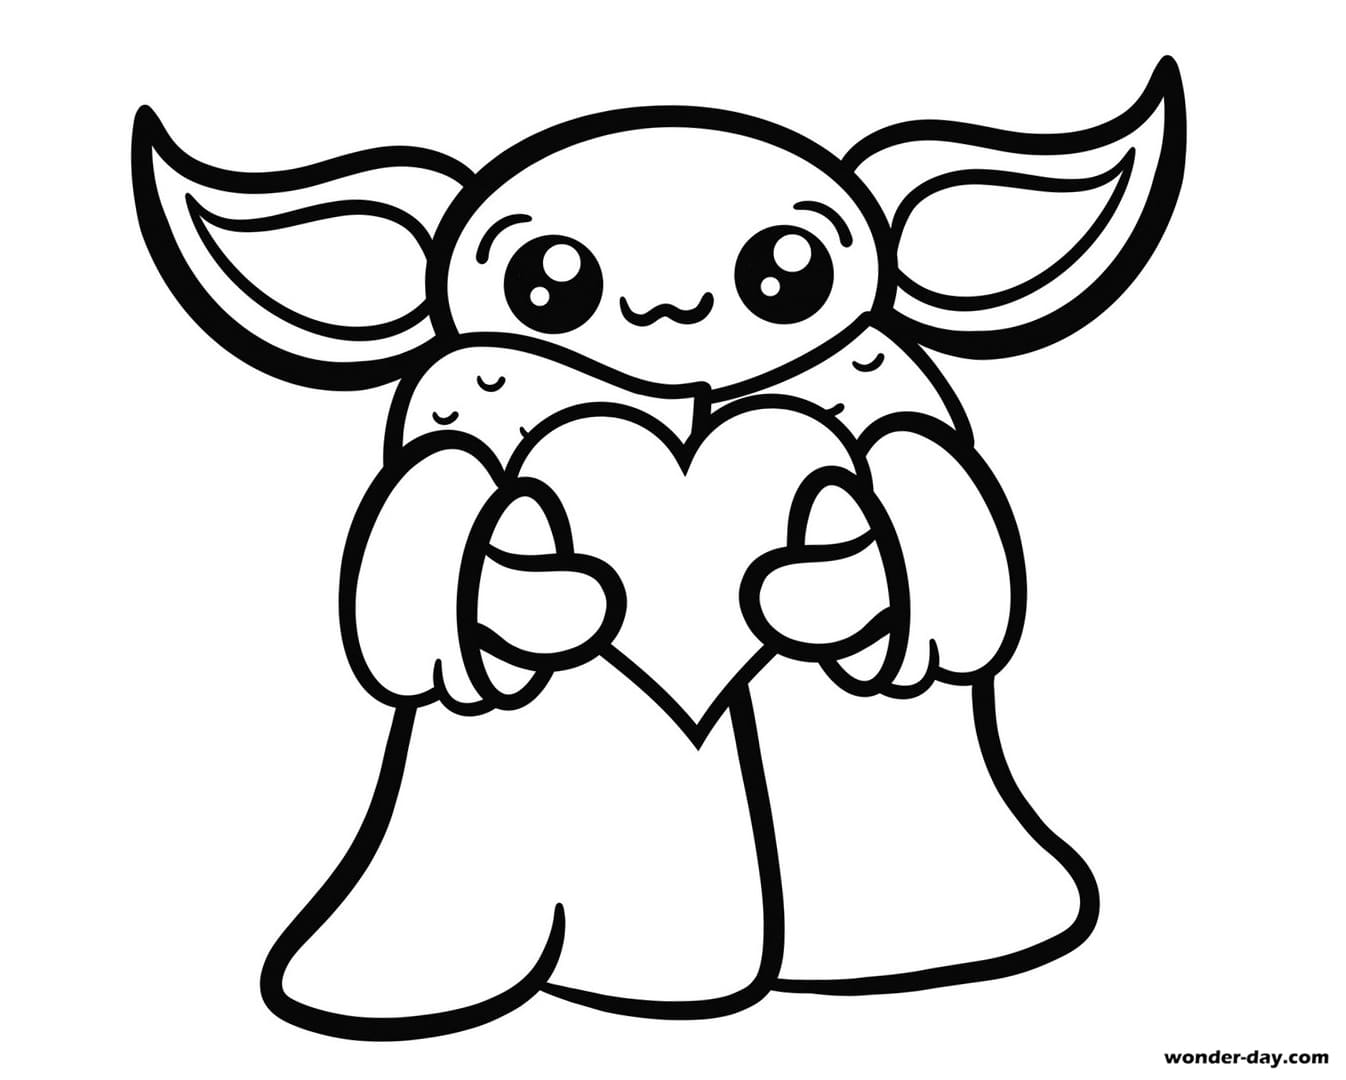 Baby Yoda Coloring Pages Free Printable Wonder Day Coloring Pages For Children And Adults